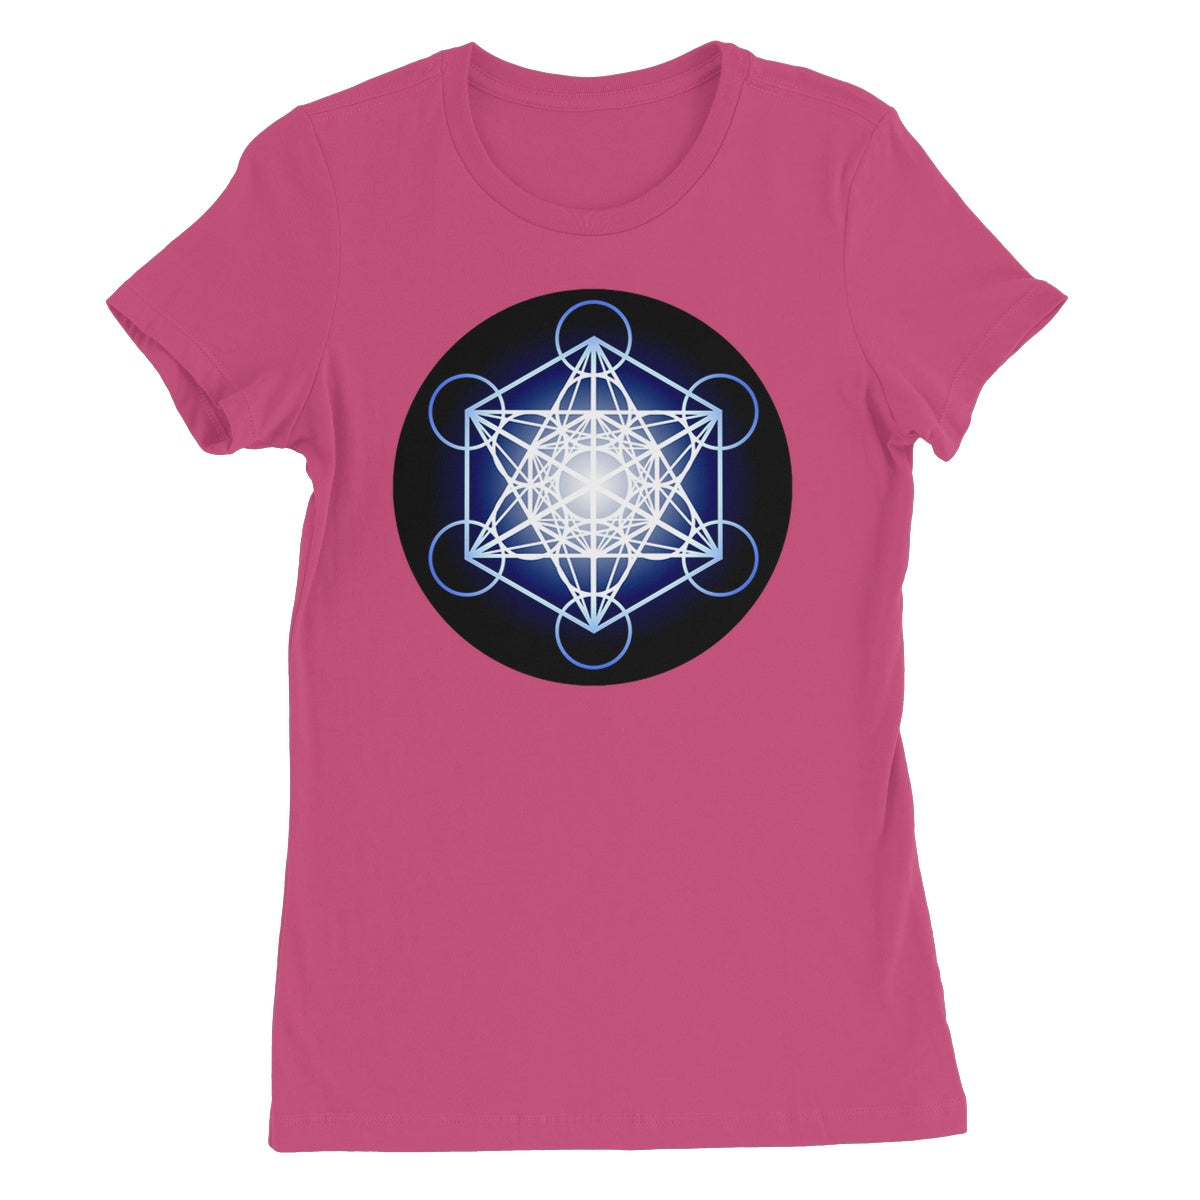 Metatron's Cube in Blue Women's T-Shirt - Nature of Flowers